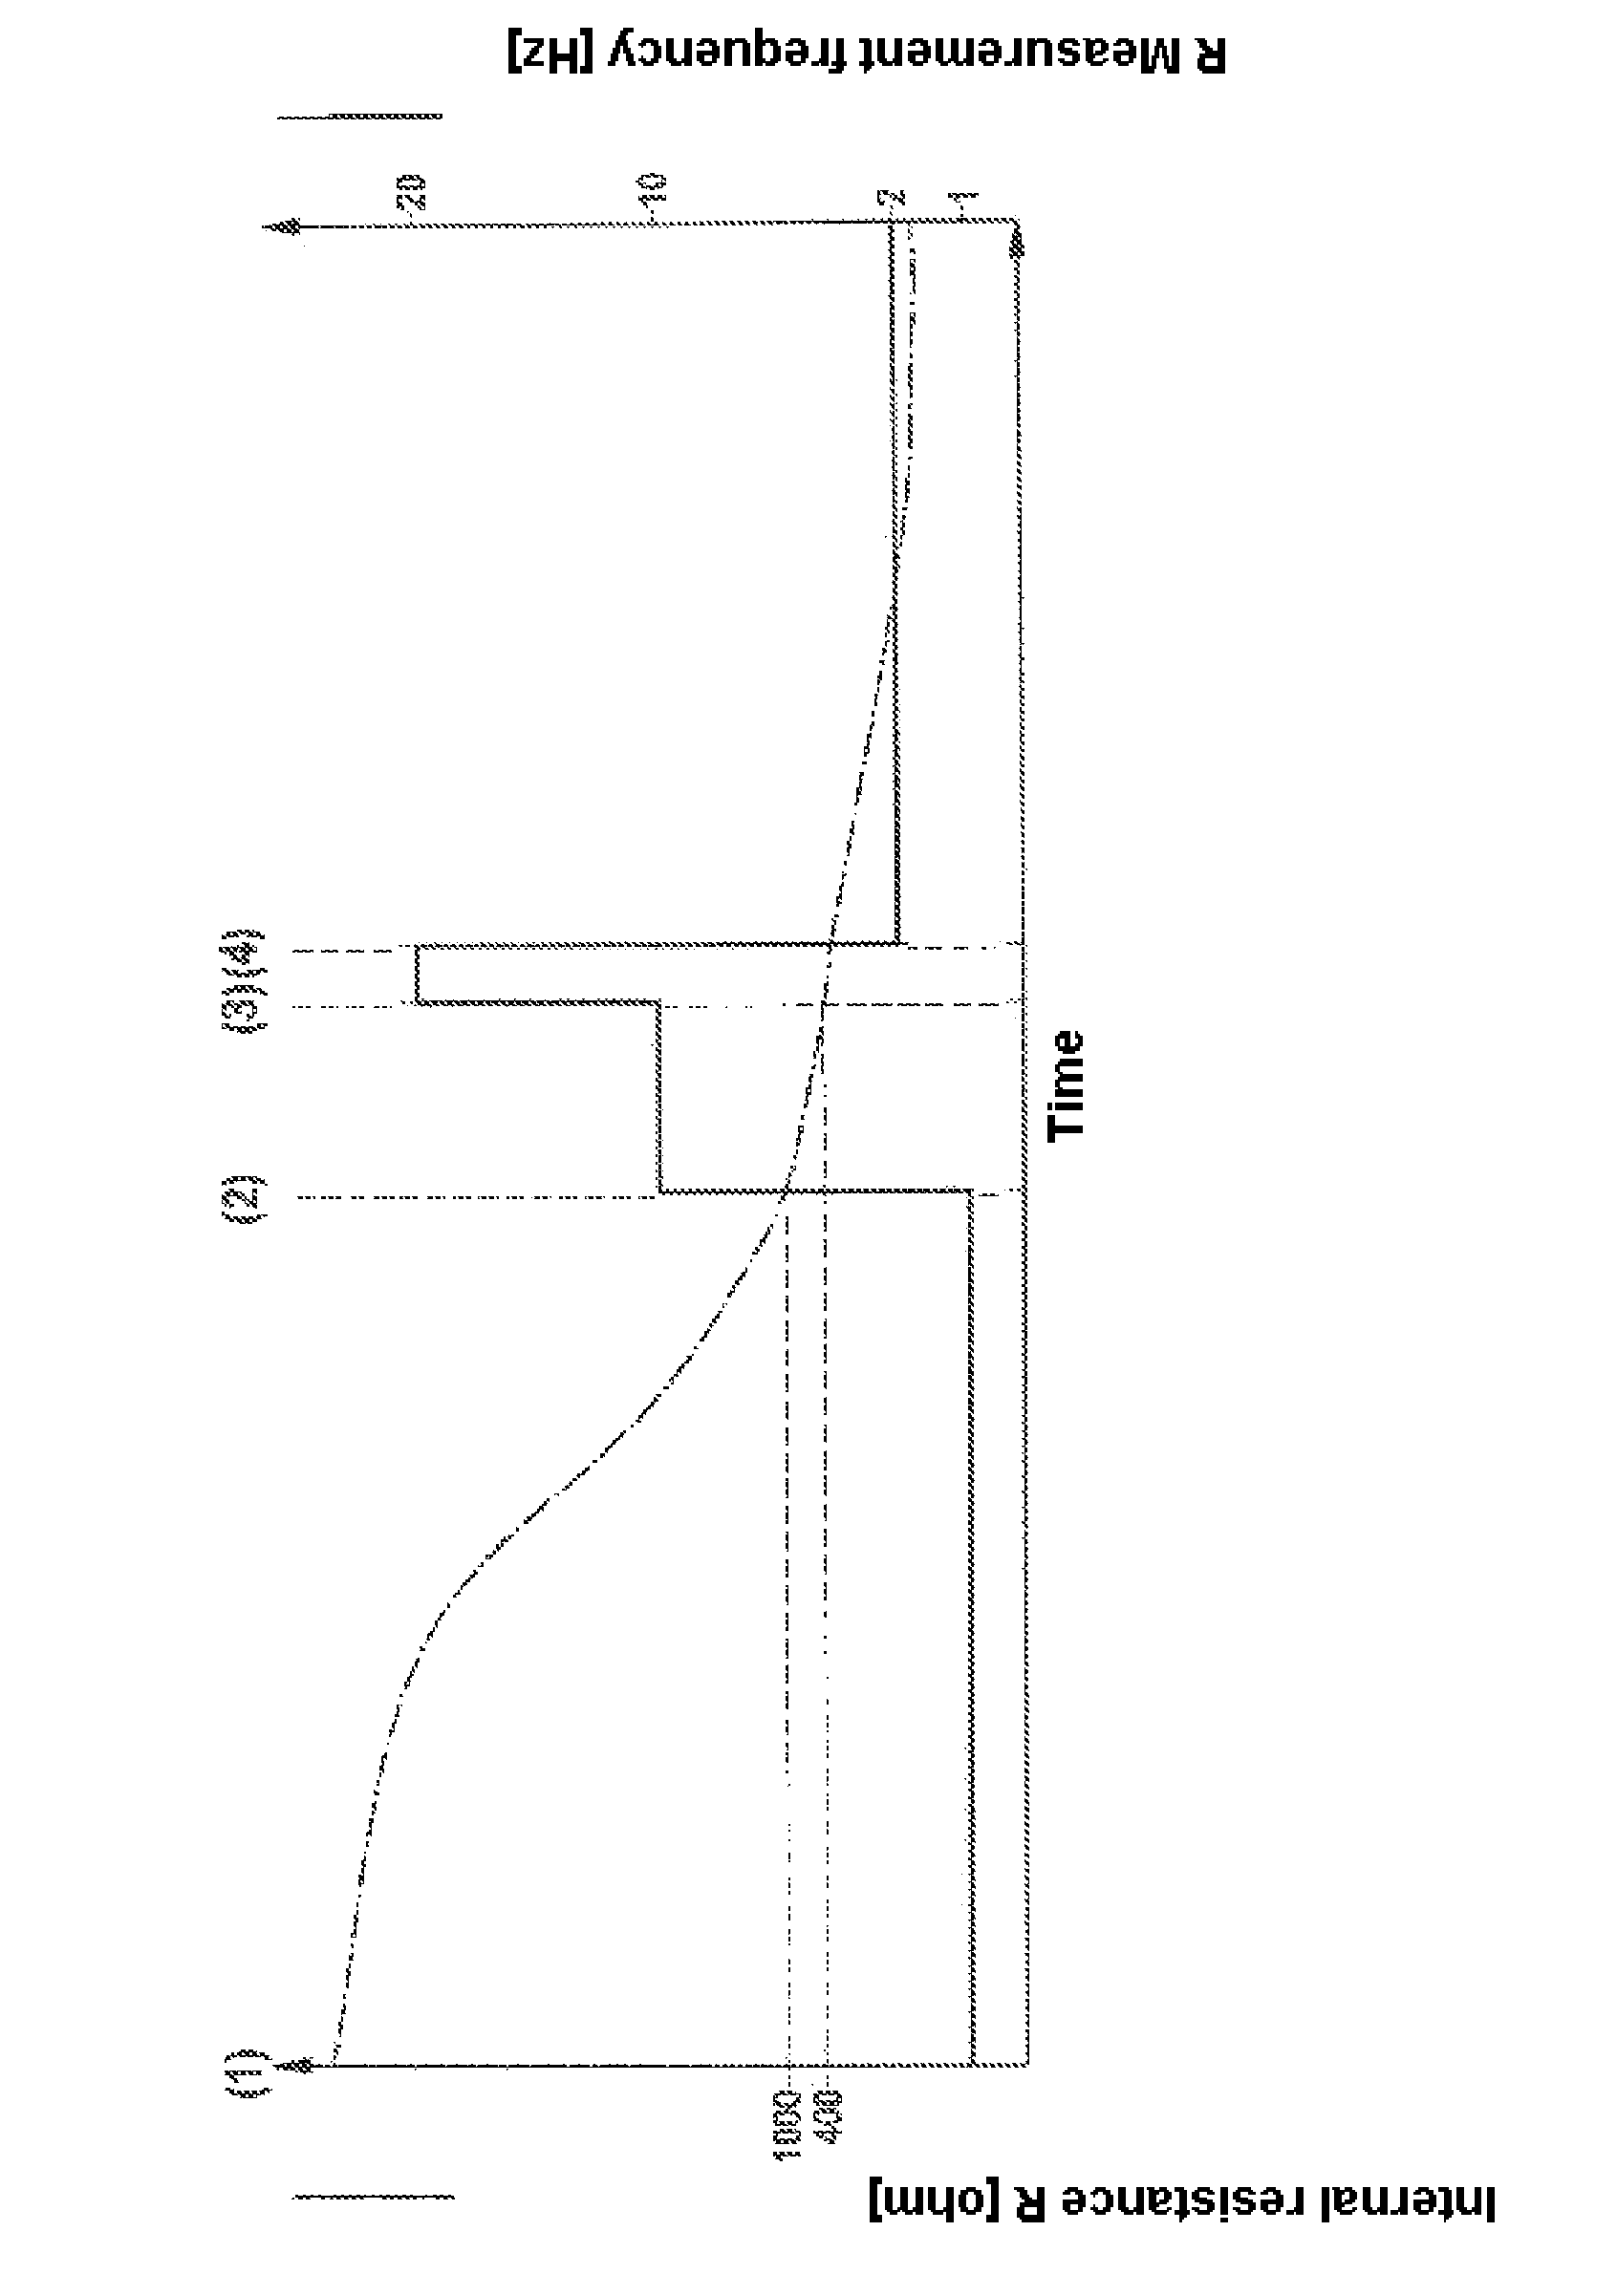 Method for detecting the operational readiness of a jump lambda sensor